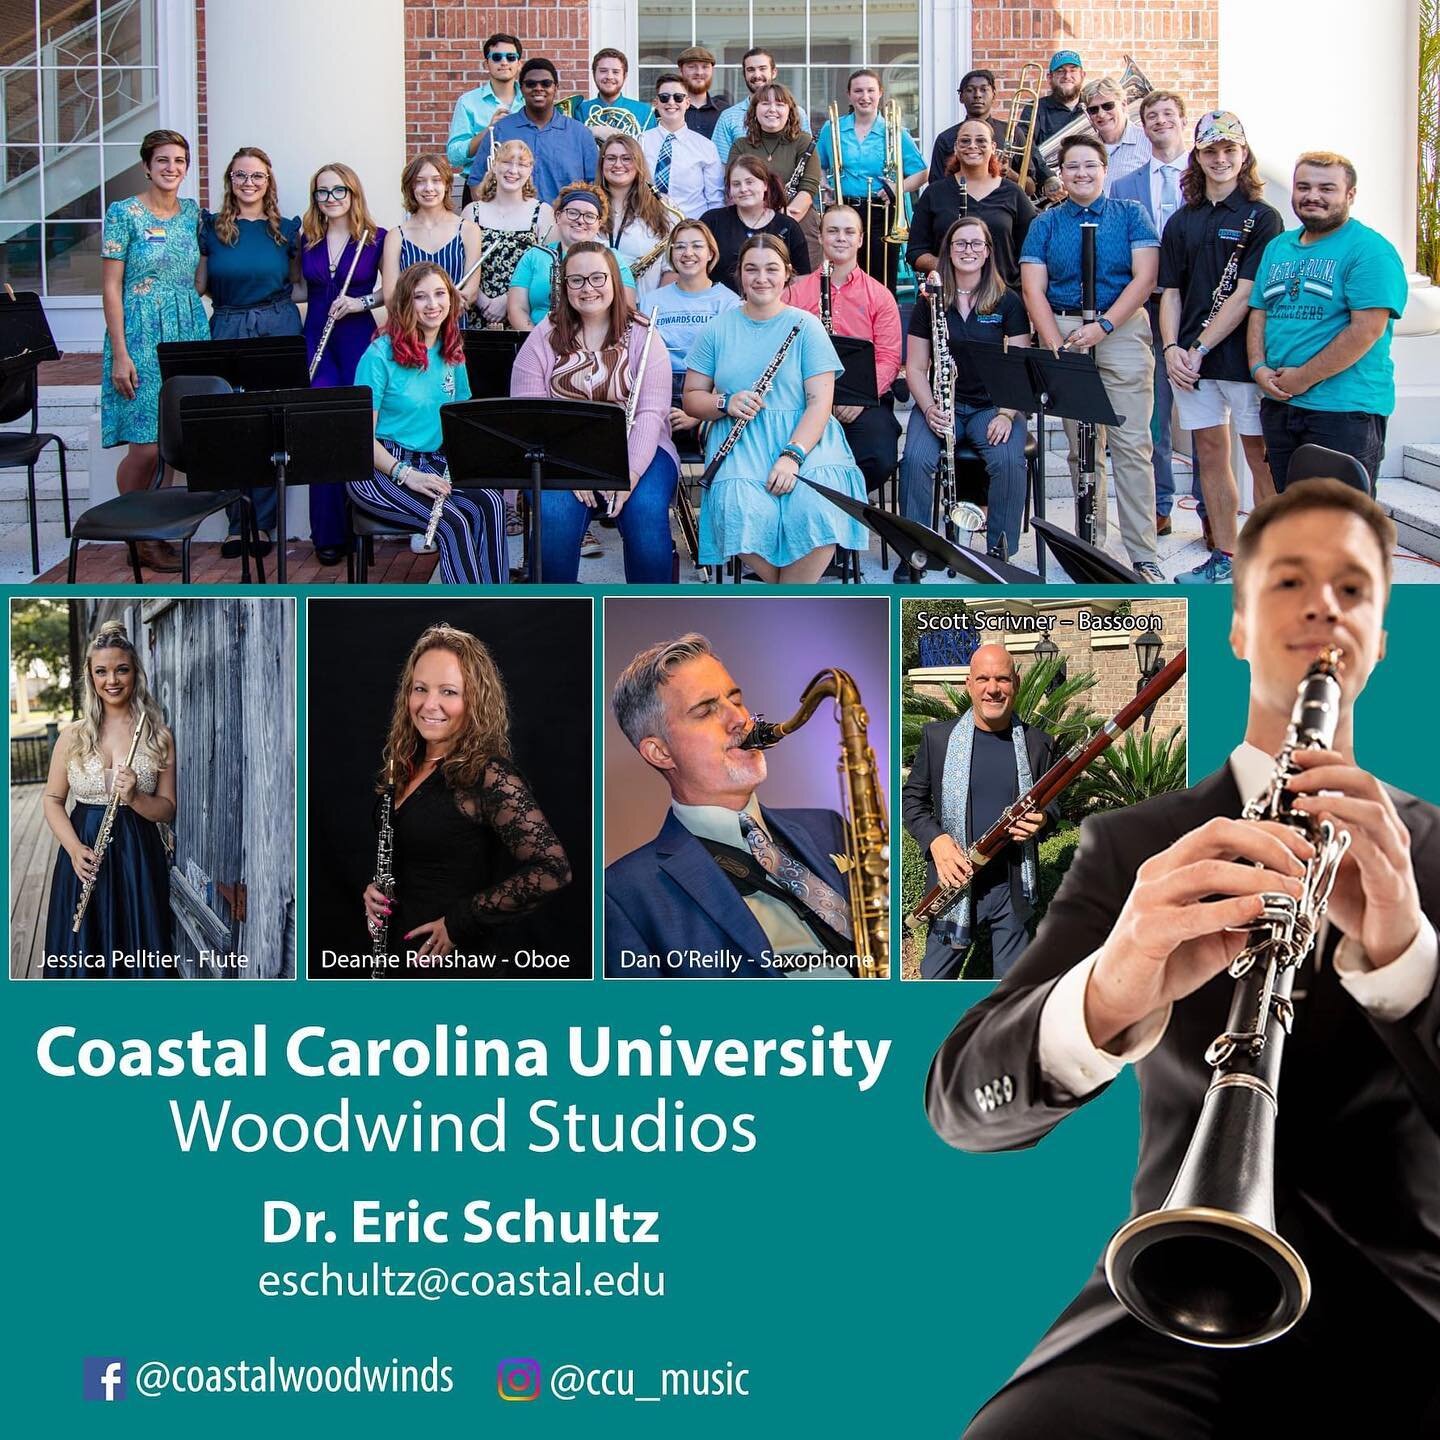 High School Seniors - have you signed up for an audition time yet? Scholarships available for all instruments. Reach out with any questions!
coastal.edu/music/audition
Please share! #music #major #college #musicmajor #audition #scholarship #apply